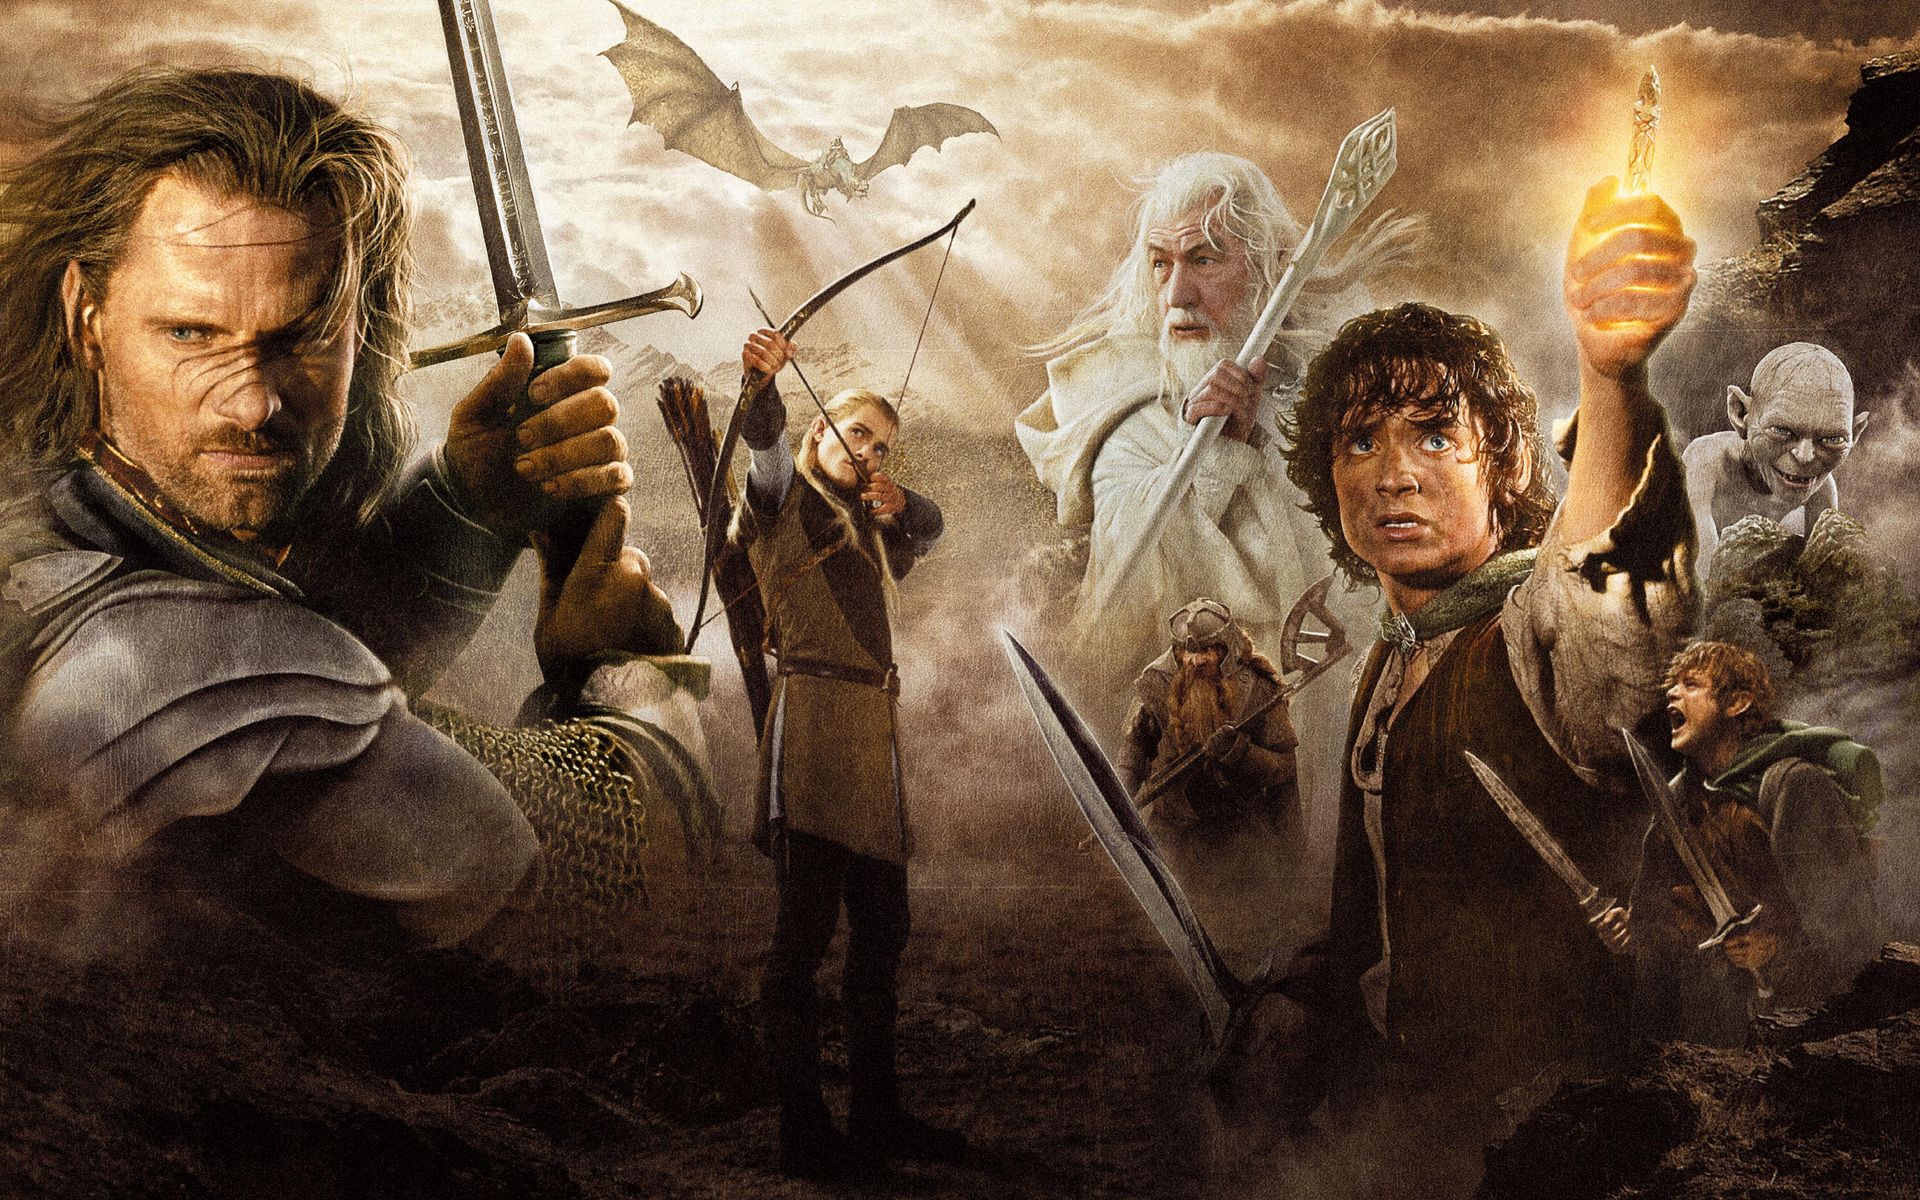 the lord of the rings: the fellowship of the ring, the lord of the rings, movie